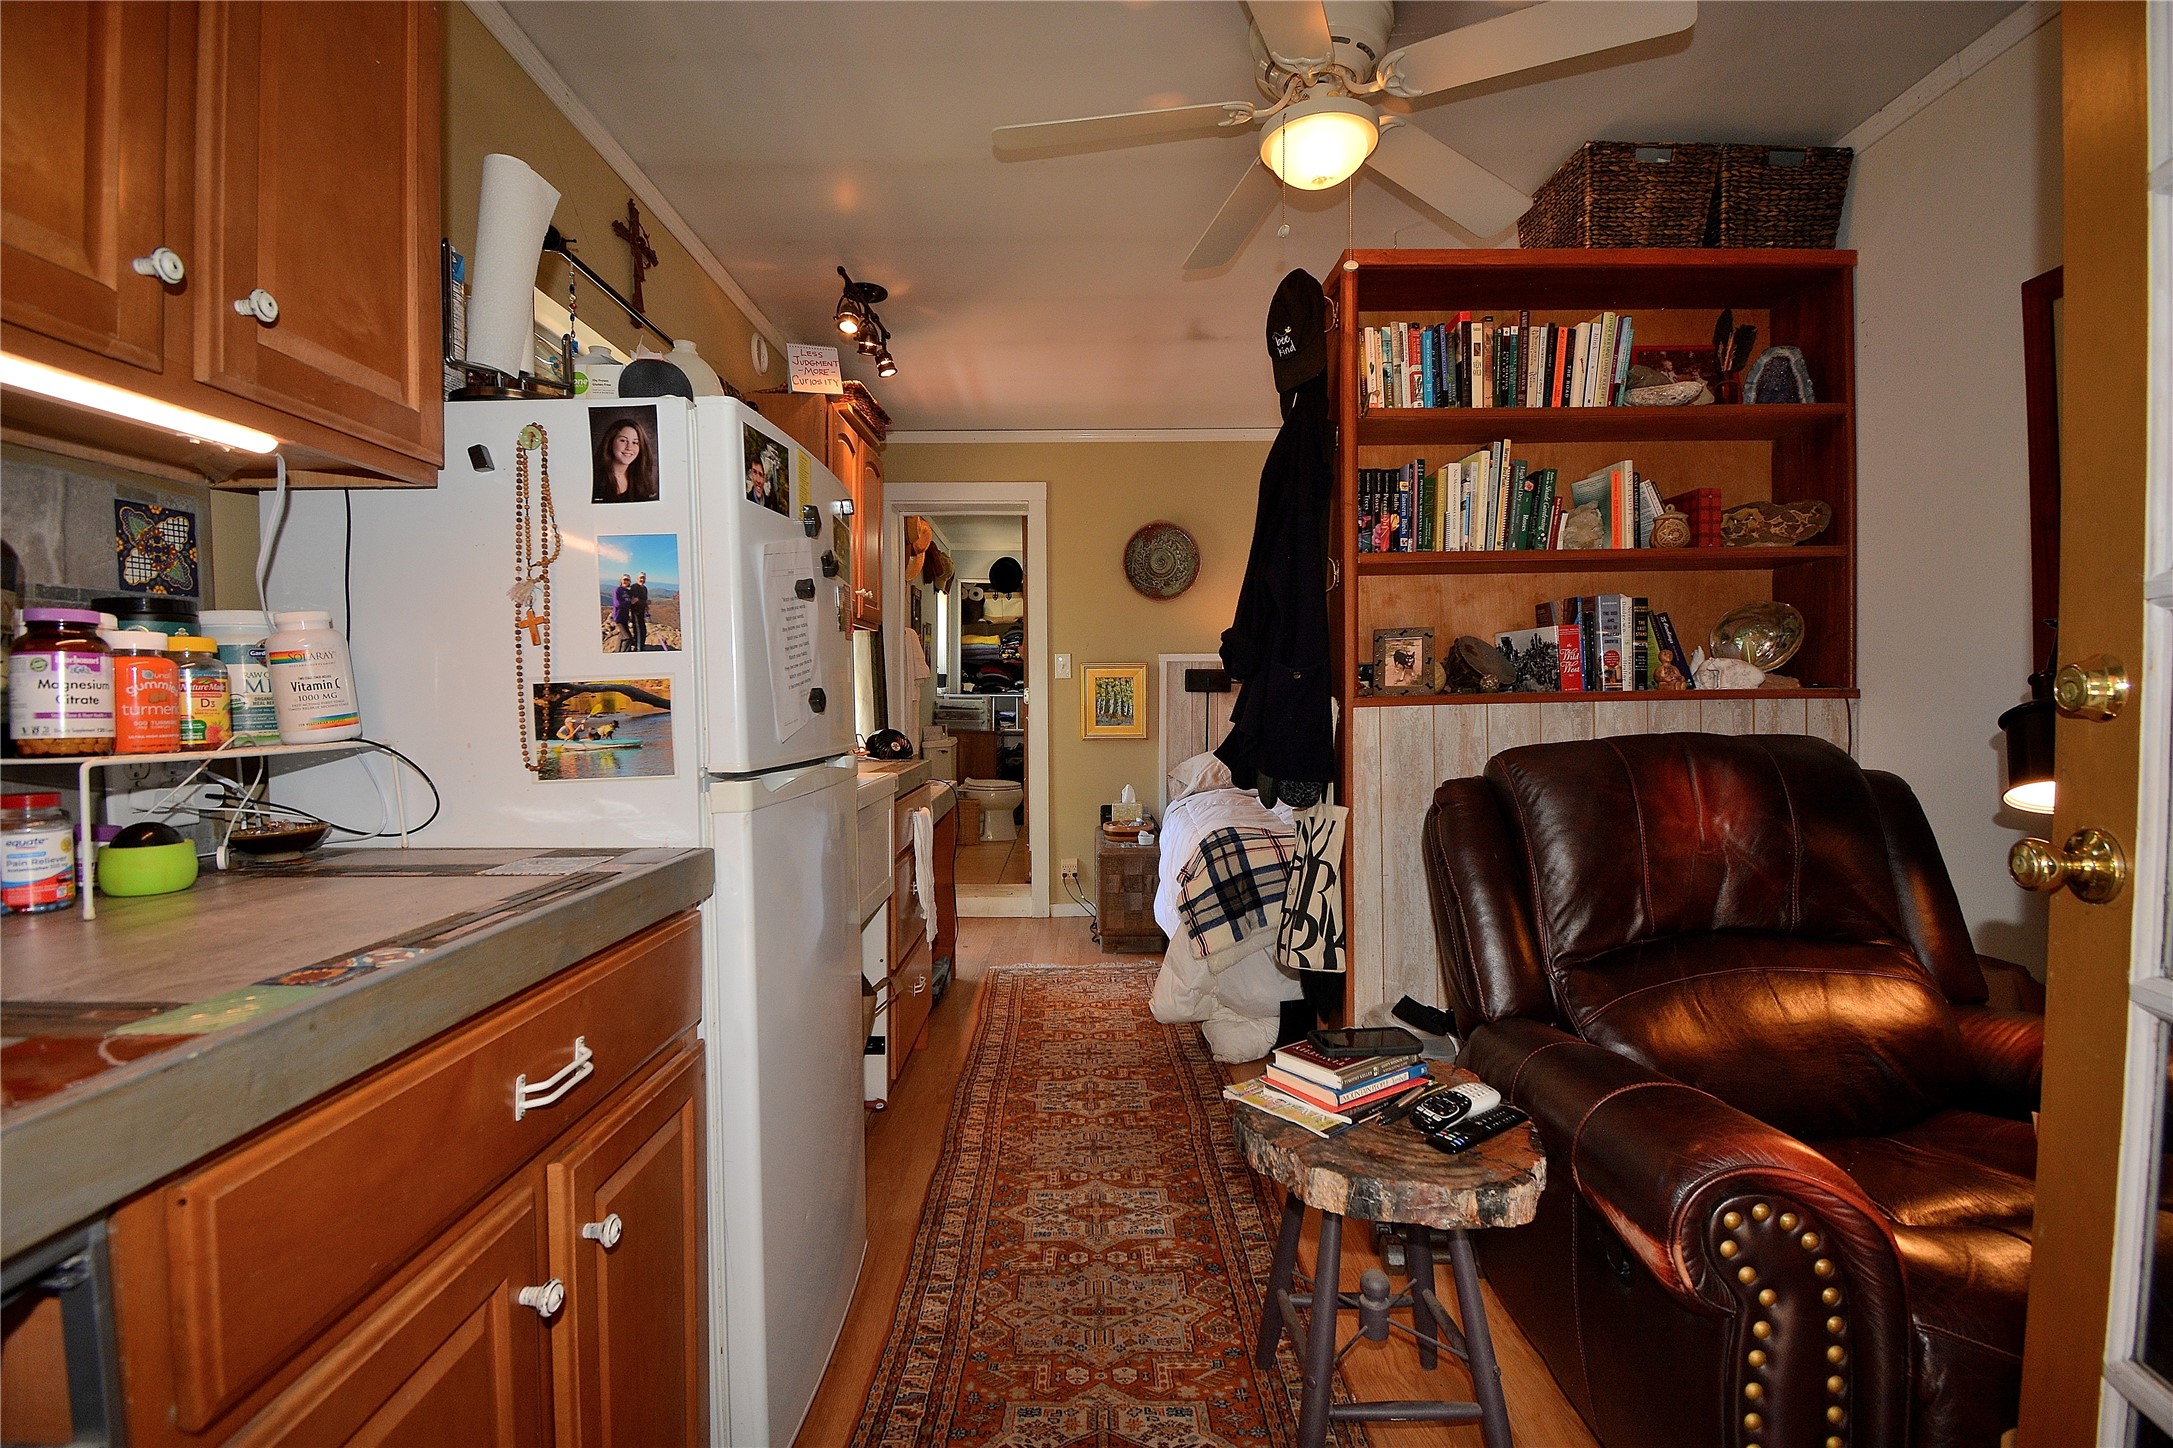 Studio apartment kitchenette and living space.